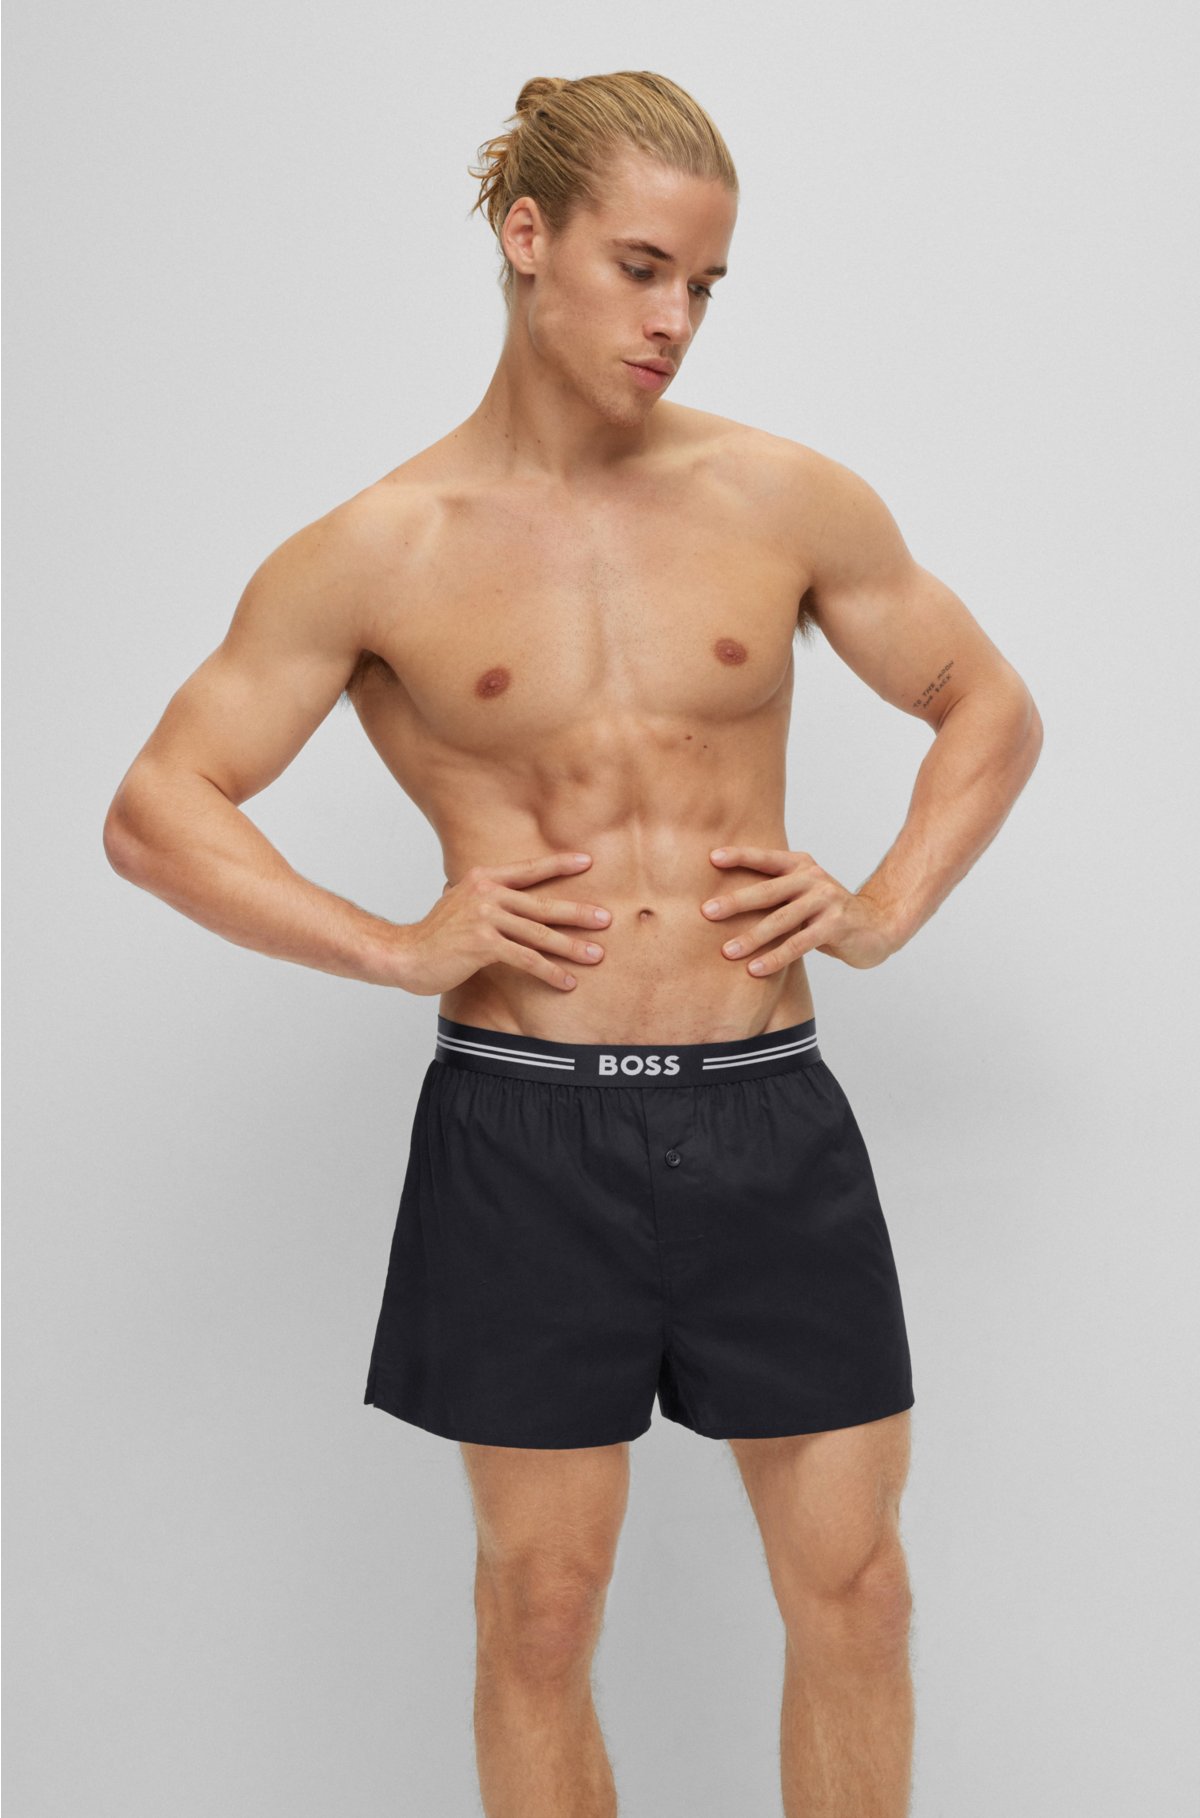 BOSS - Two-pack of logo shorts cotton with pyjama waistbands